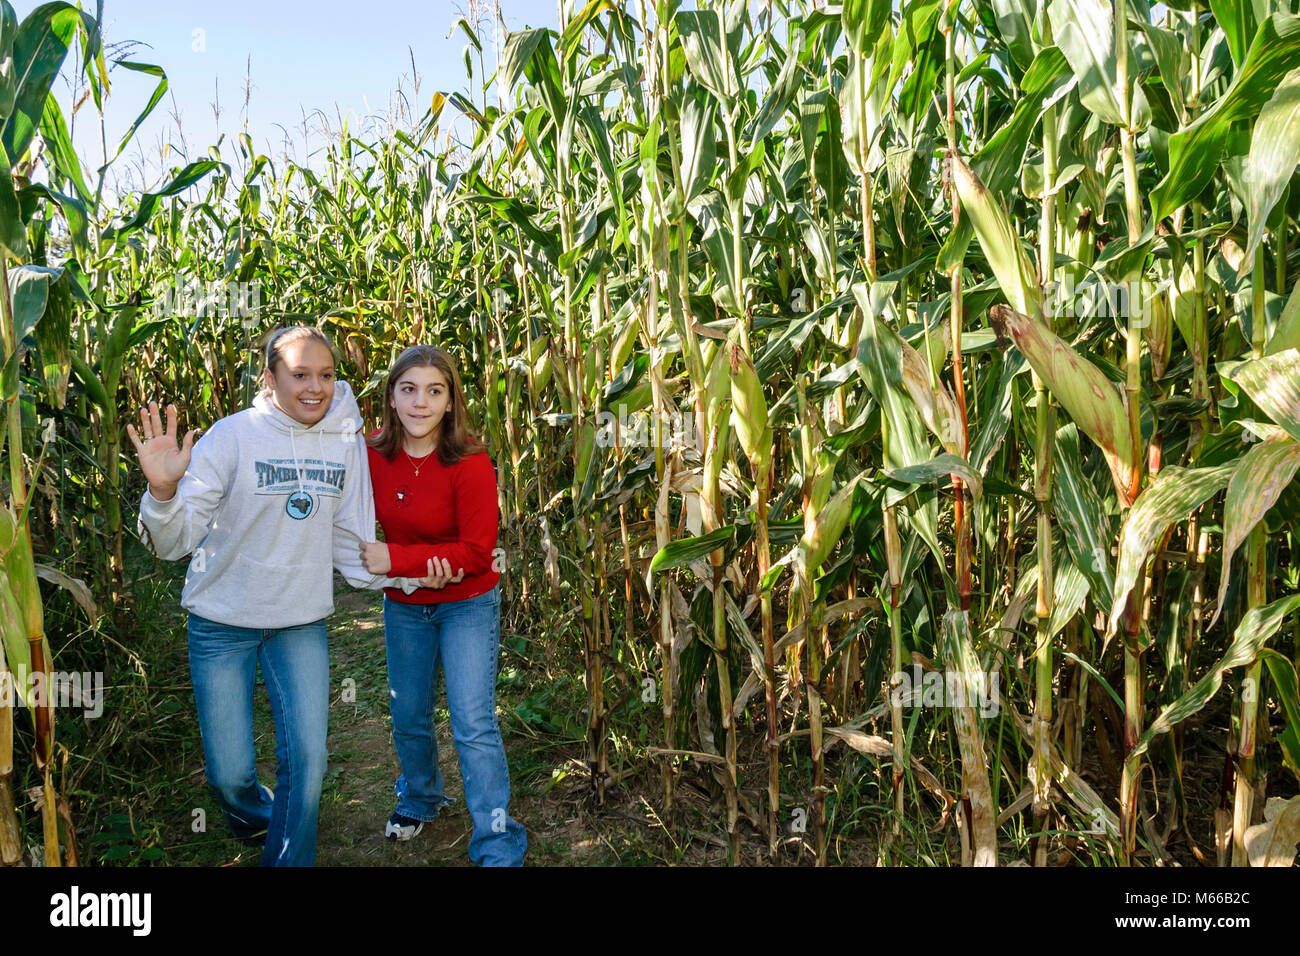 West Virginia,Appalachia Greenbrier County,Frankford,Miller's 'Mazing Corn Maze,teen teens teenage teenager teenagers youth adolescent,student student Stock Photo